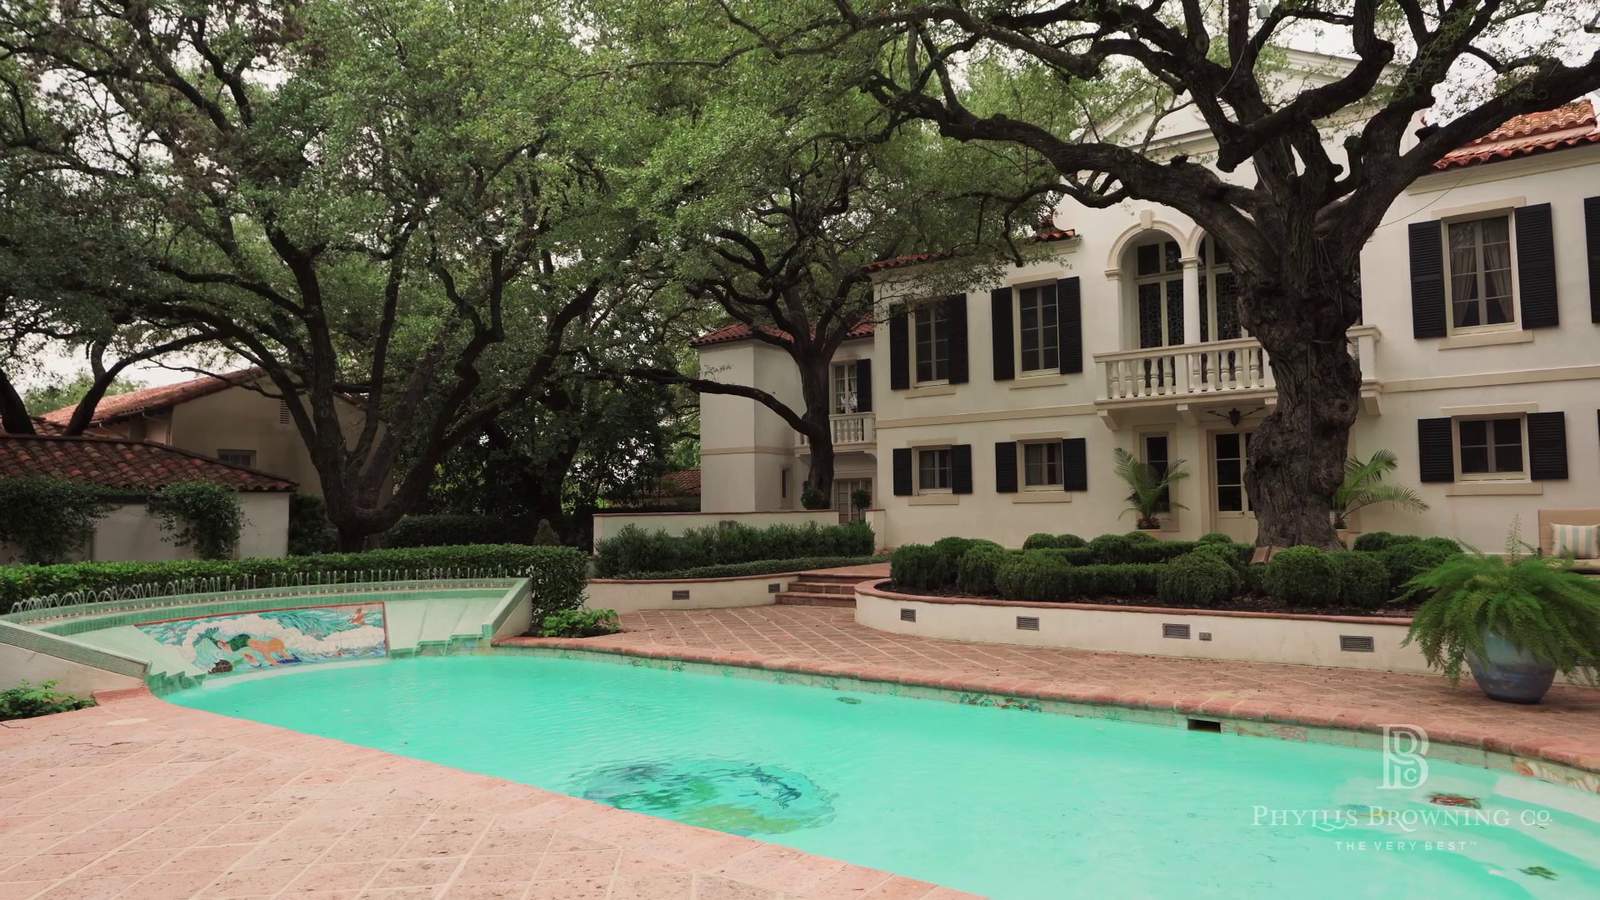 Video gives inside look at historic 90-year-old Olmos Park mansion for sale